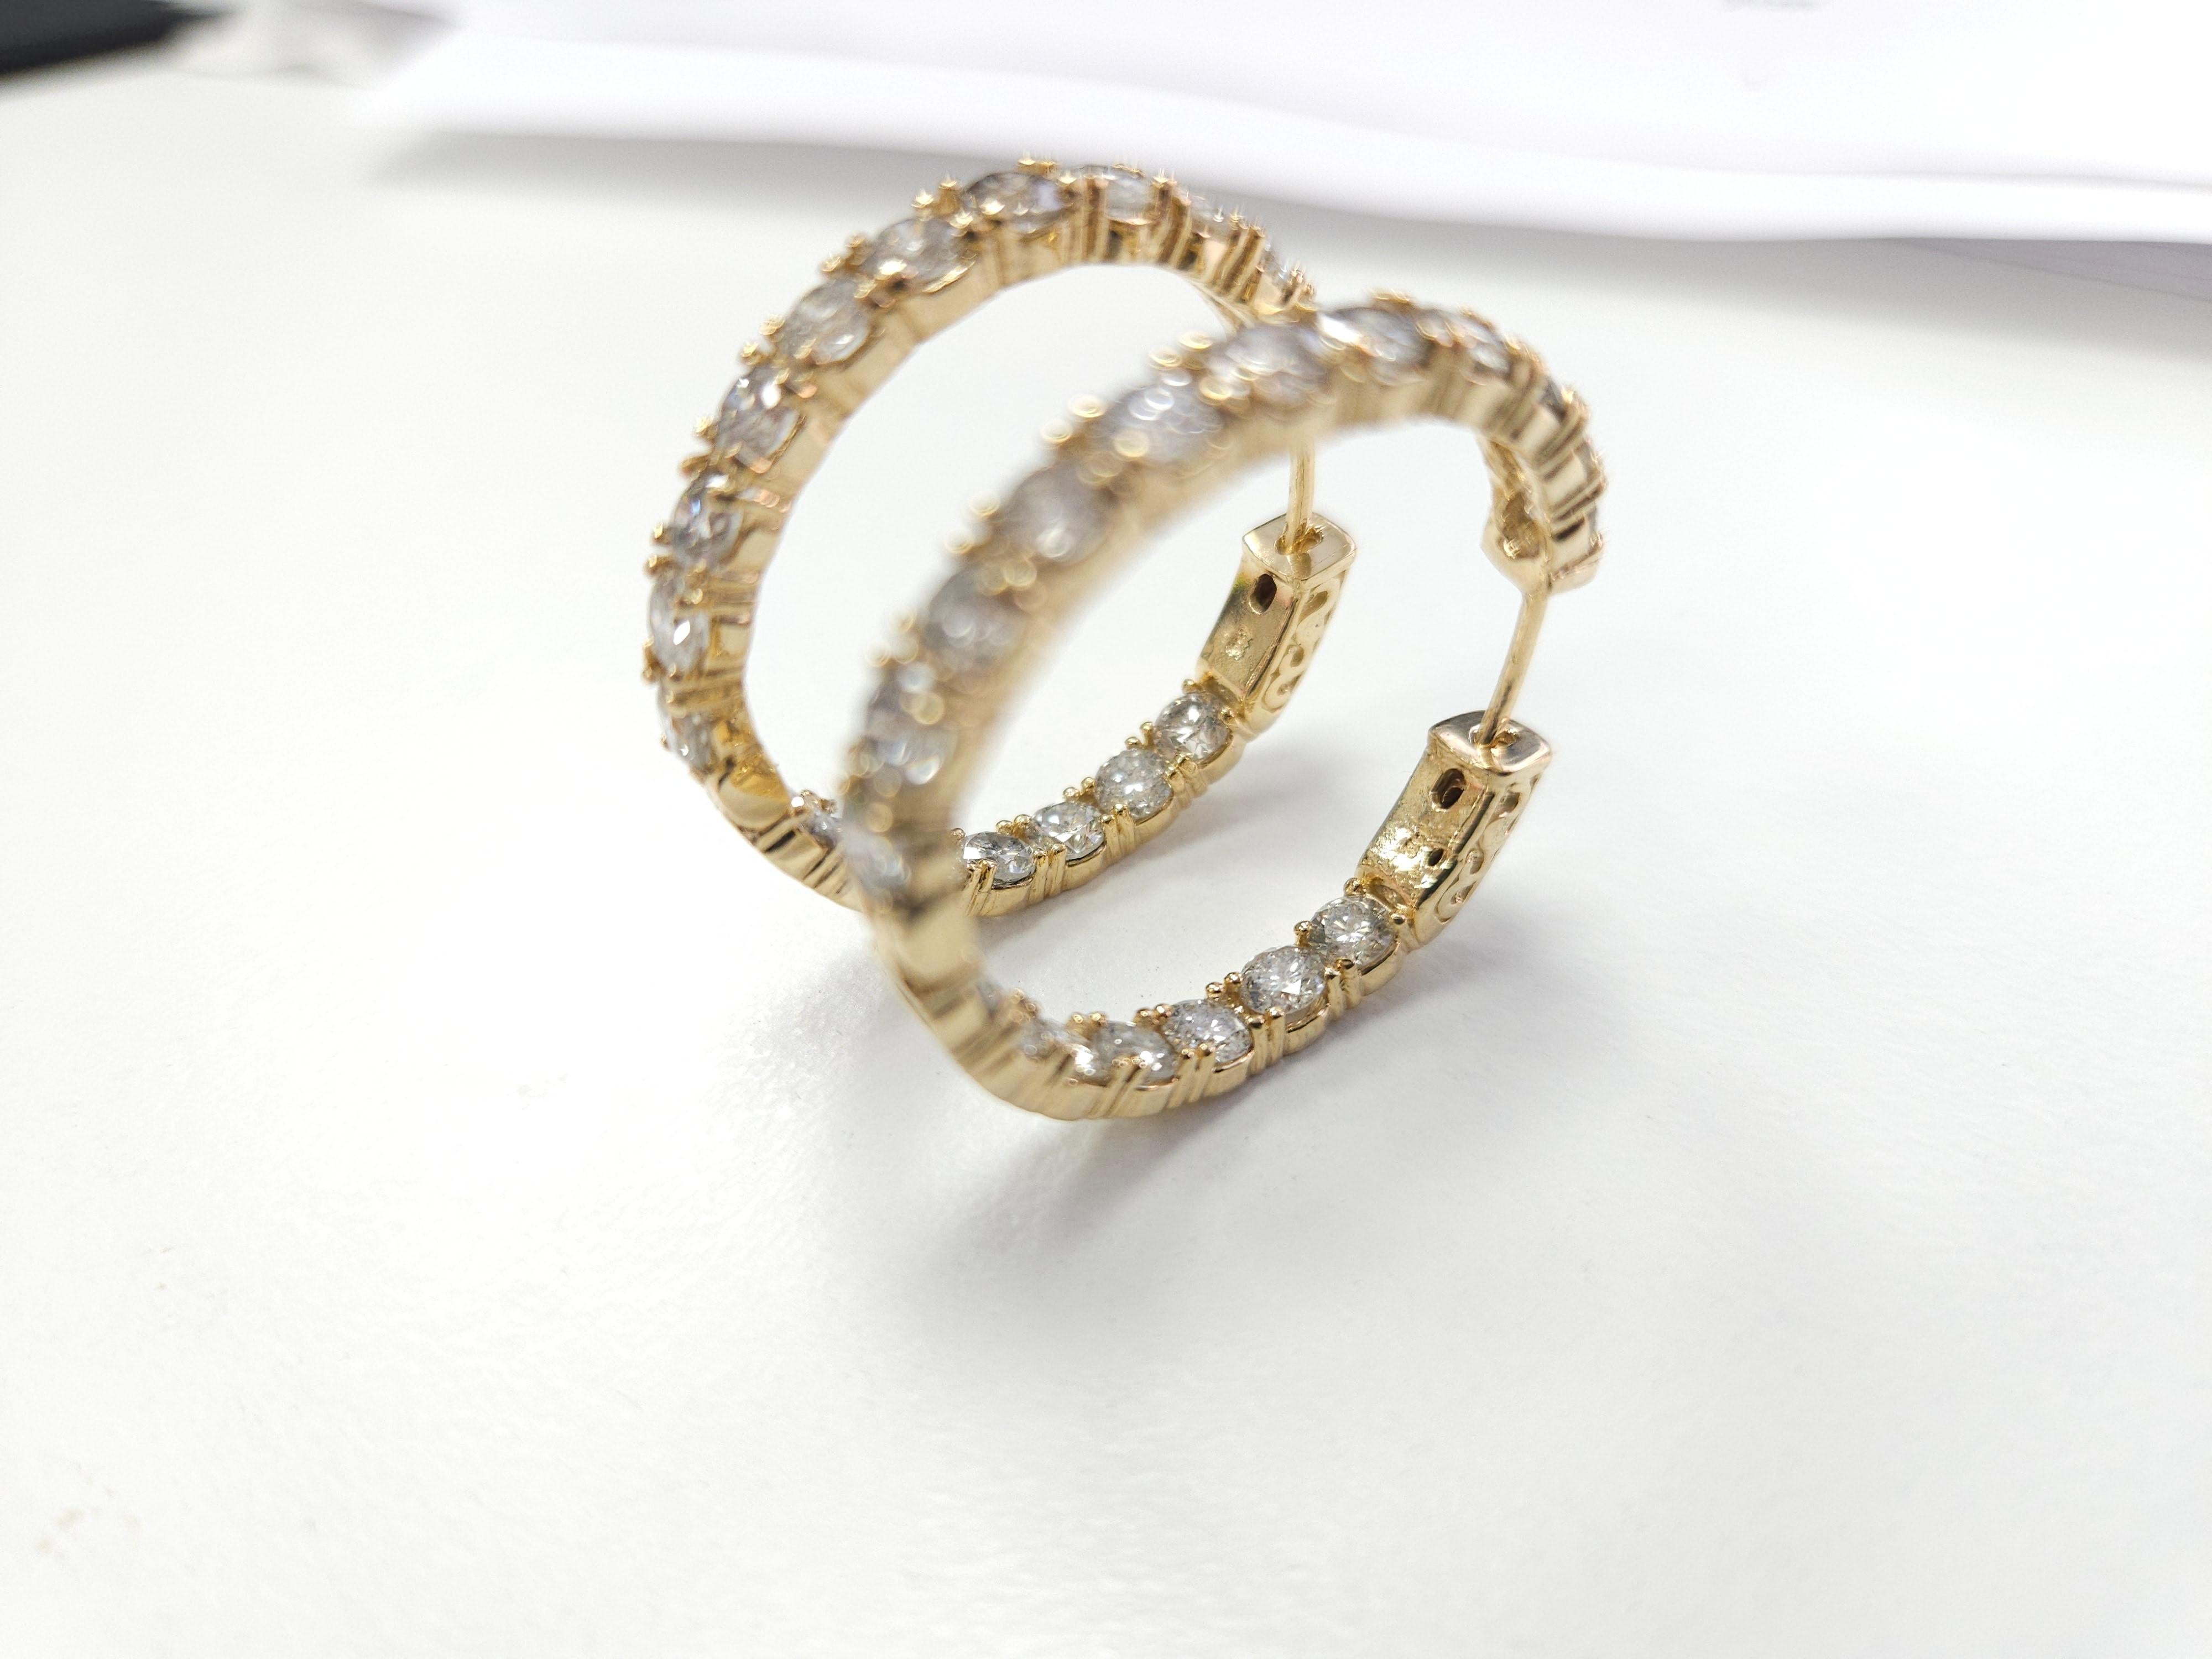 5.43 Carat Diamond Huggie Hoops Earrings 14 Karat Yellow Gold In New Condition For Sale In Great Neck, NY